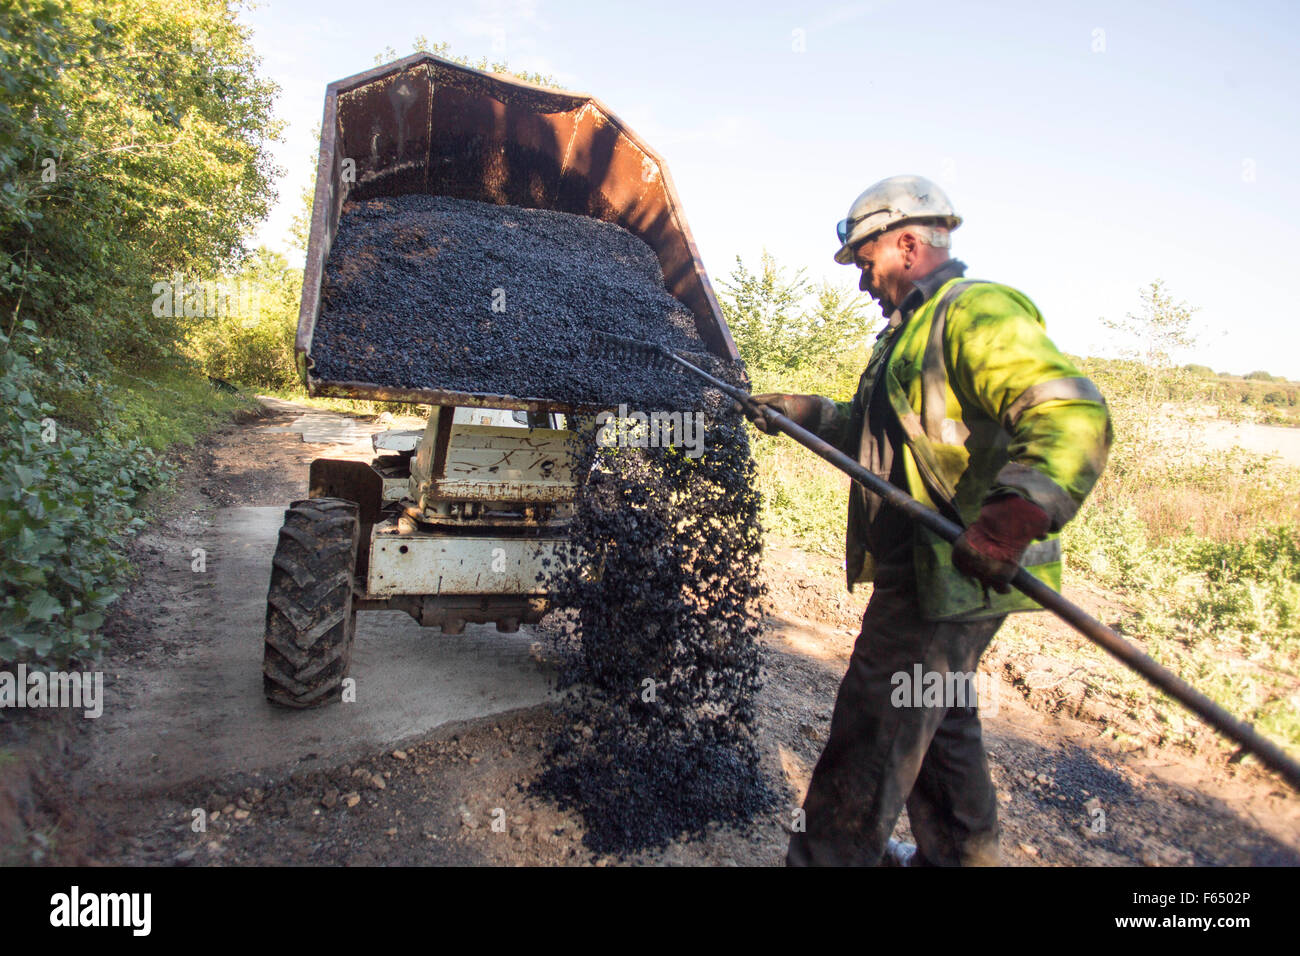 a workman empties hot asphalt onto a road from the back of a small dump truck Stock Photo